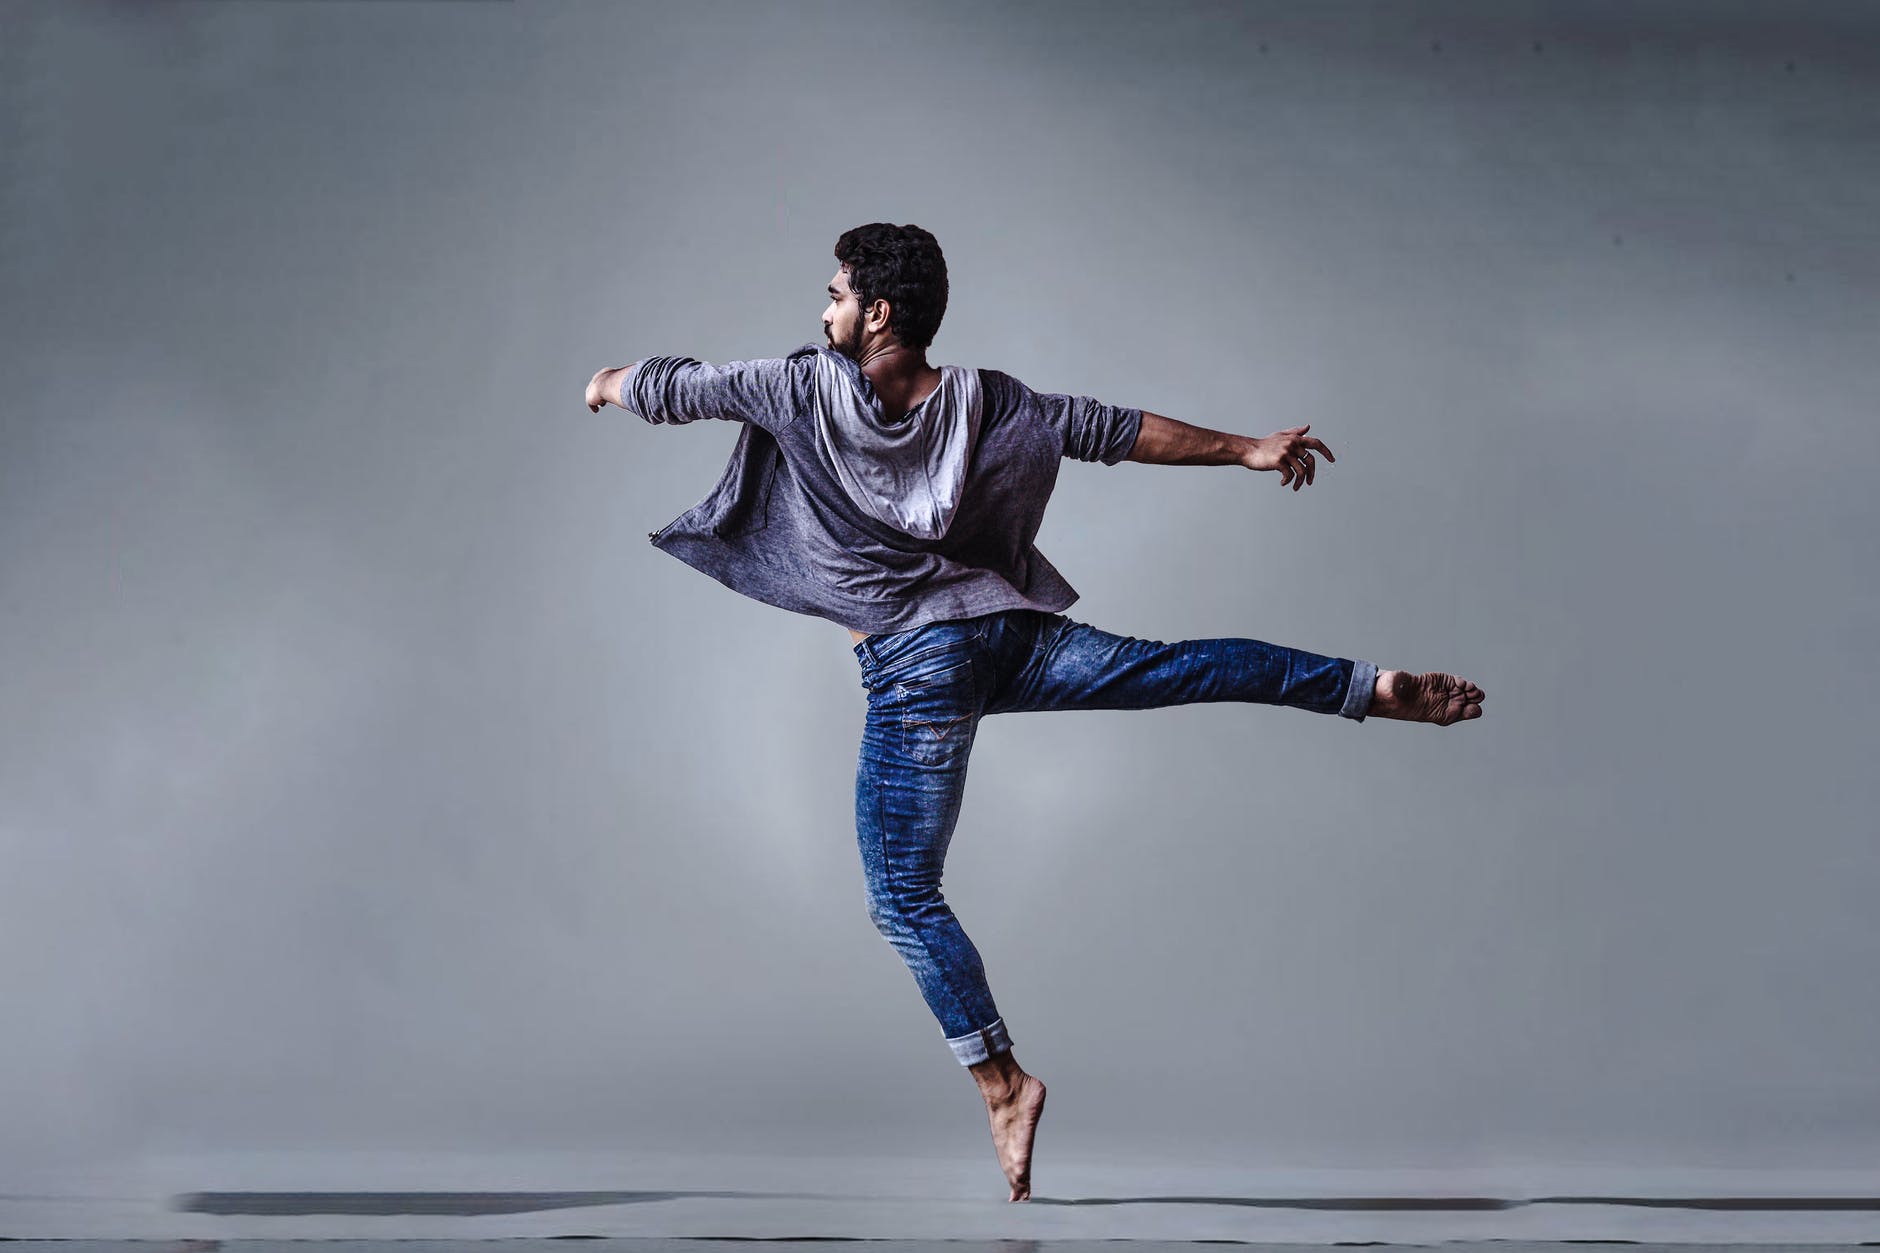 man wearing blue jeans doing pirouette spin